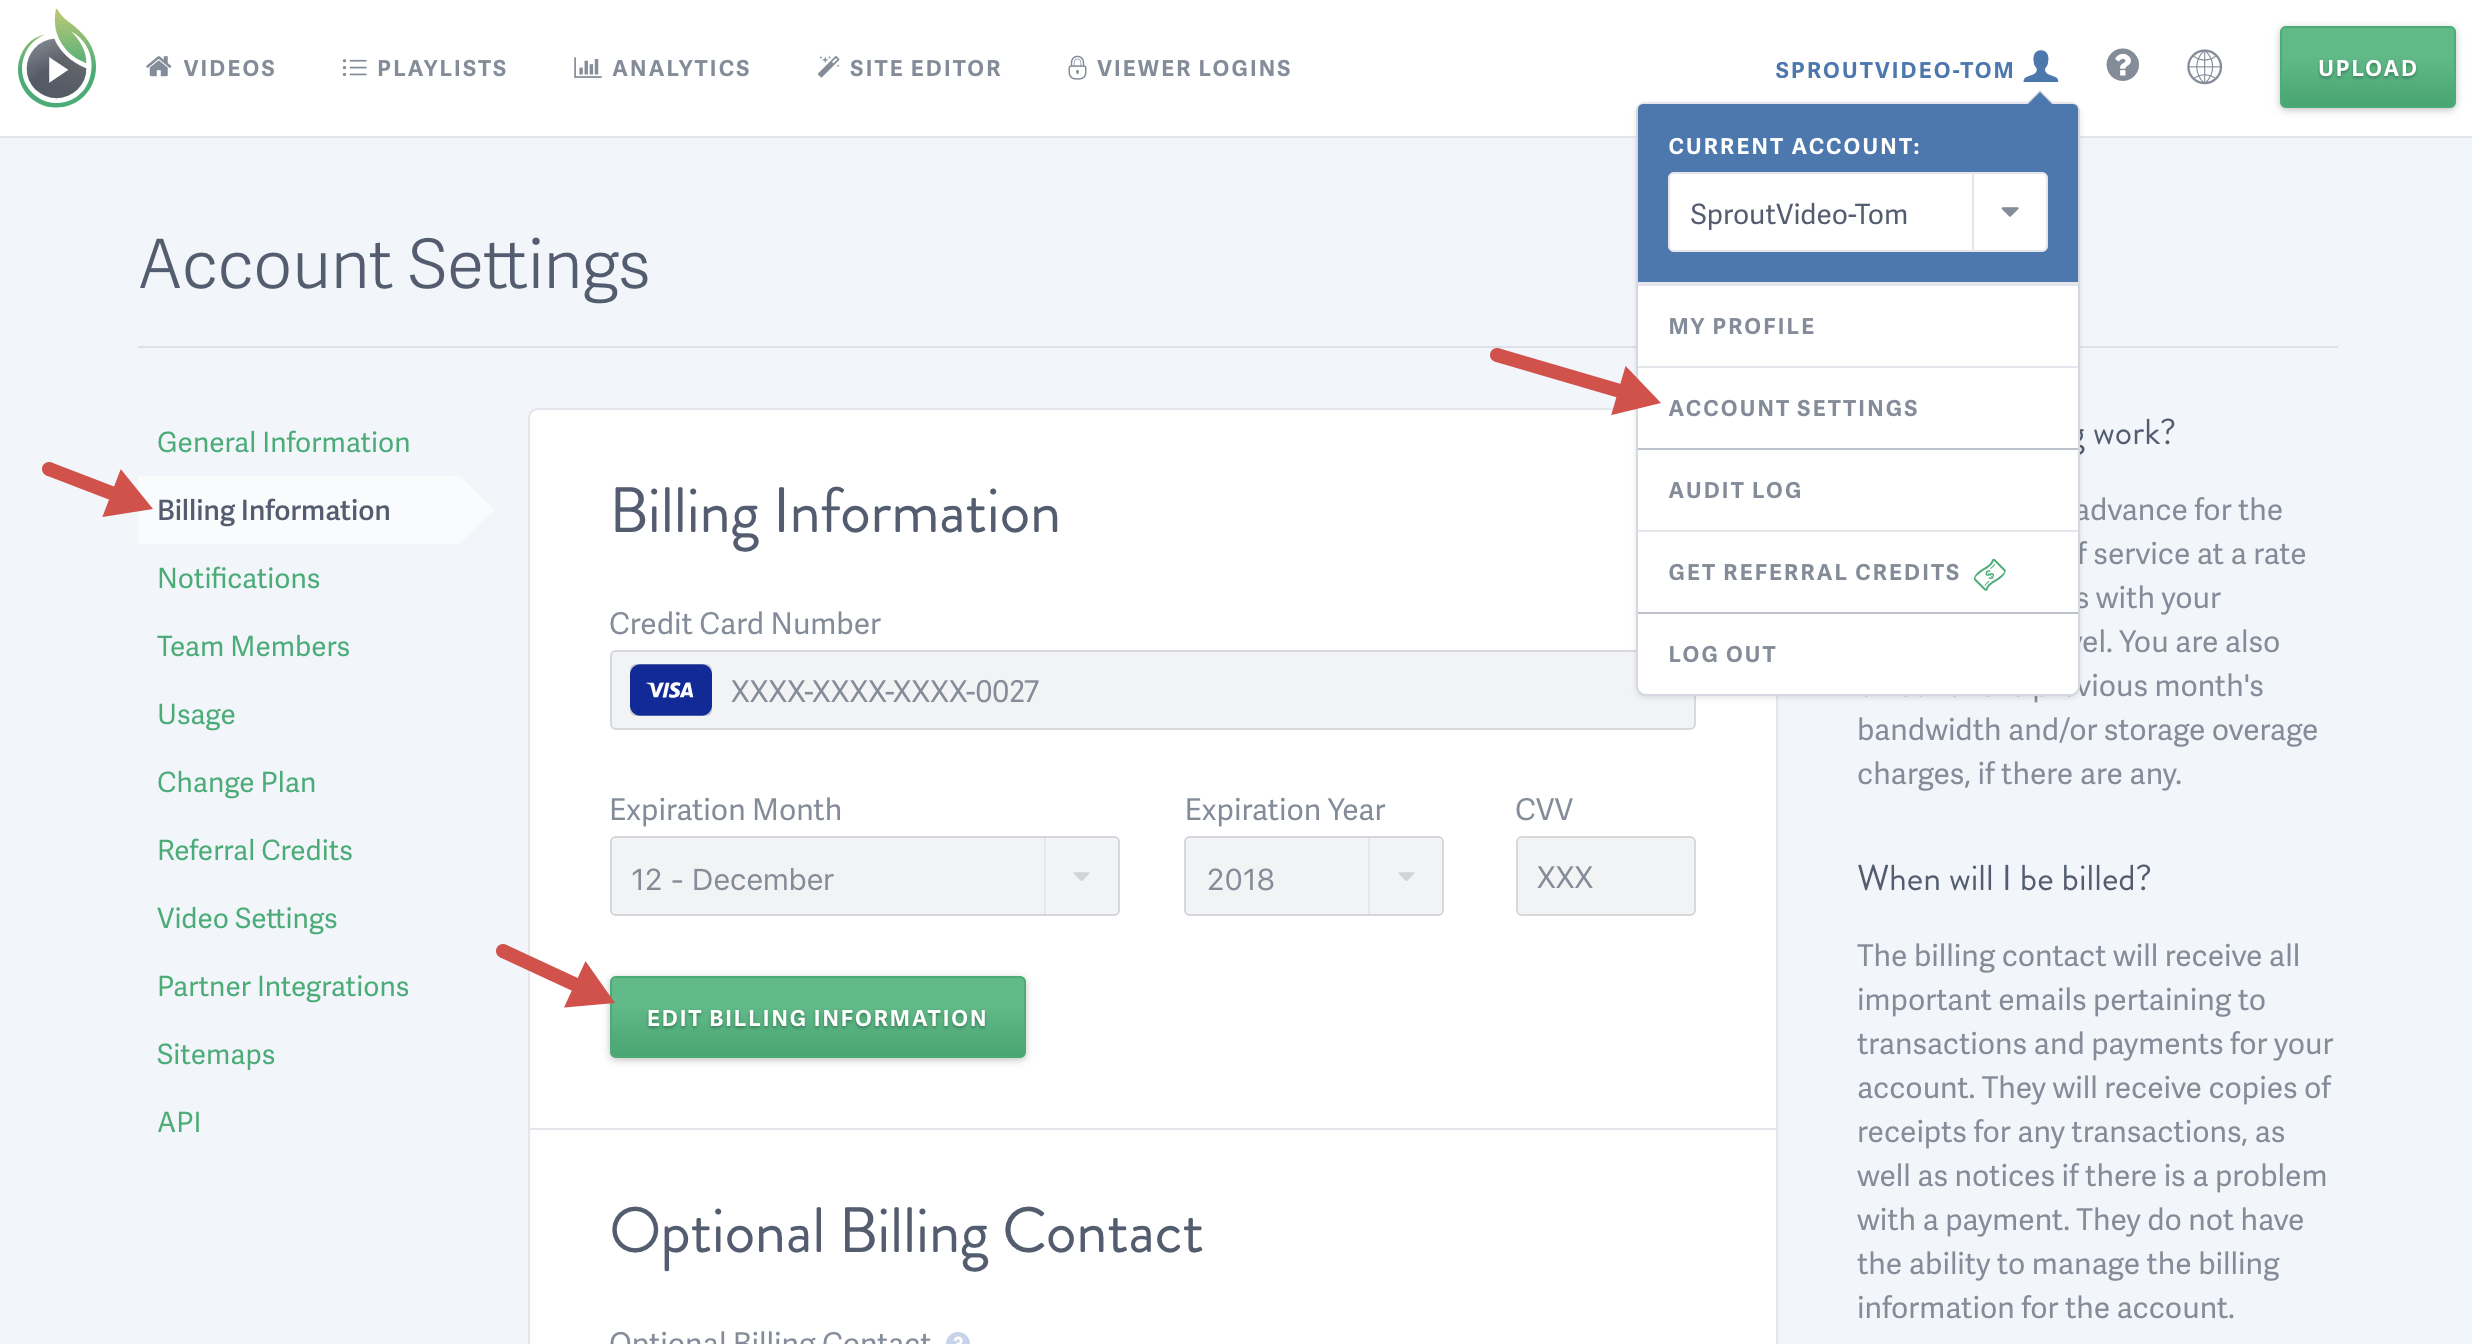 Update the billing information for your SproutVideo video hosting account